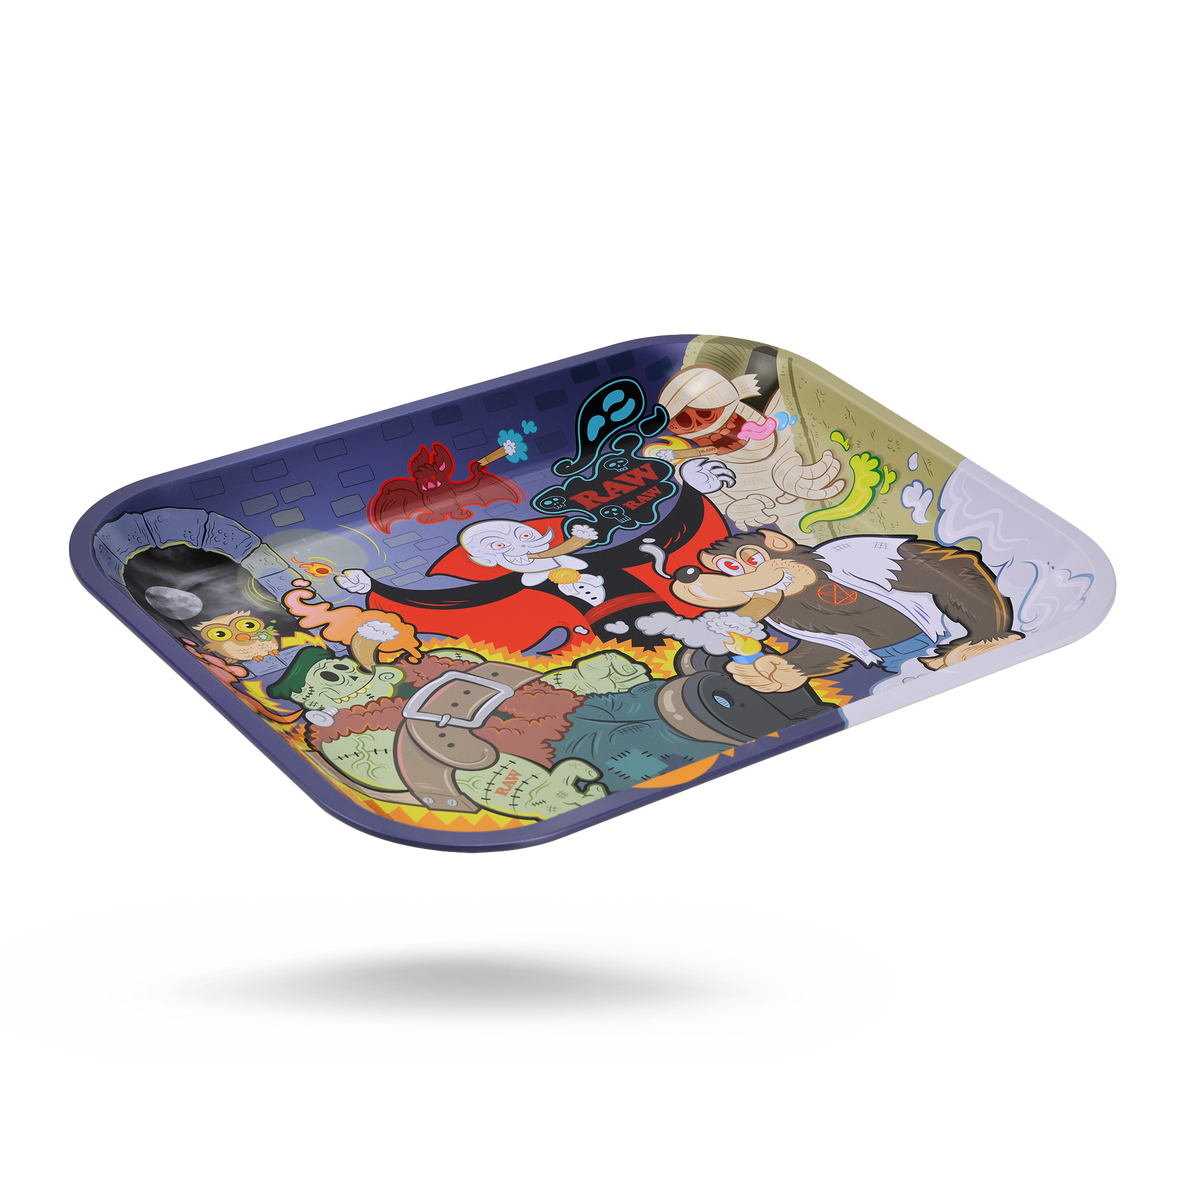 RAW Monster Sesh Rolling Tray | Limited Edition Rolling Trays WAR00172-MUSA01 esd-official